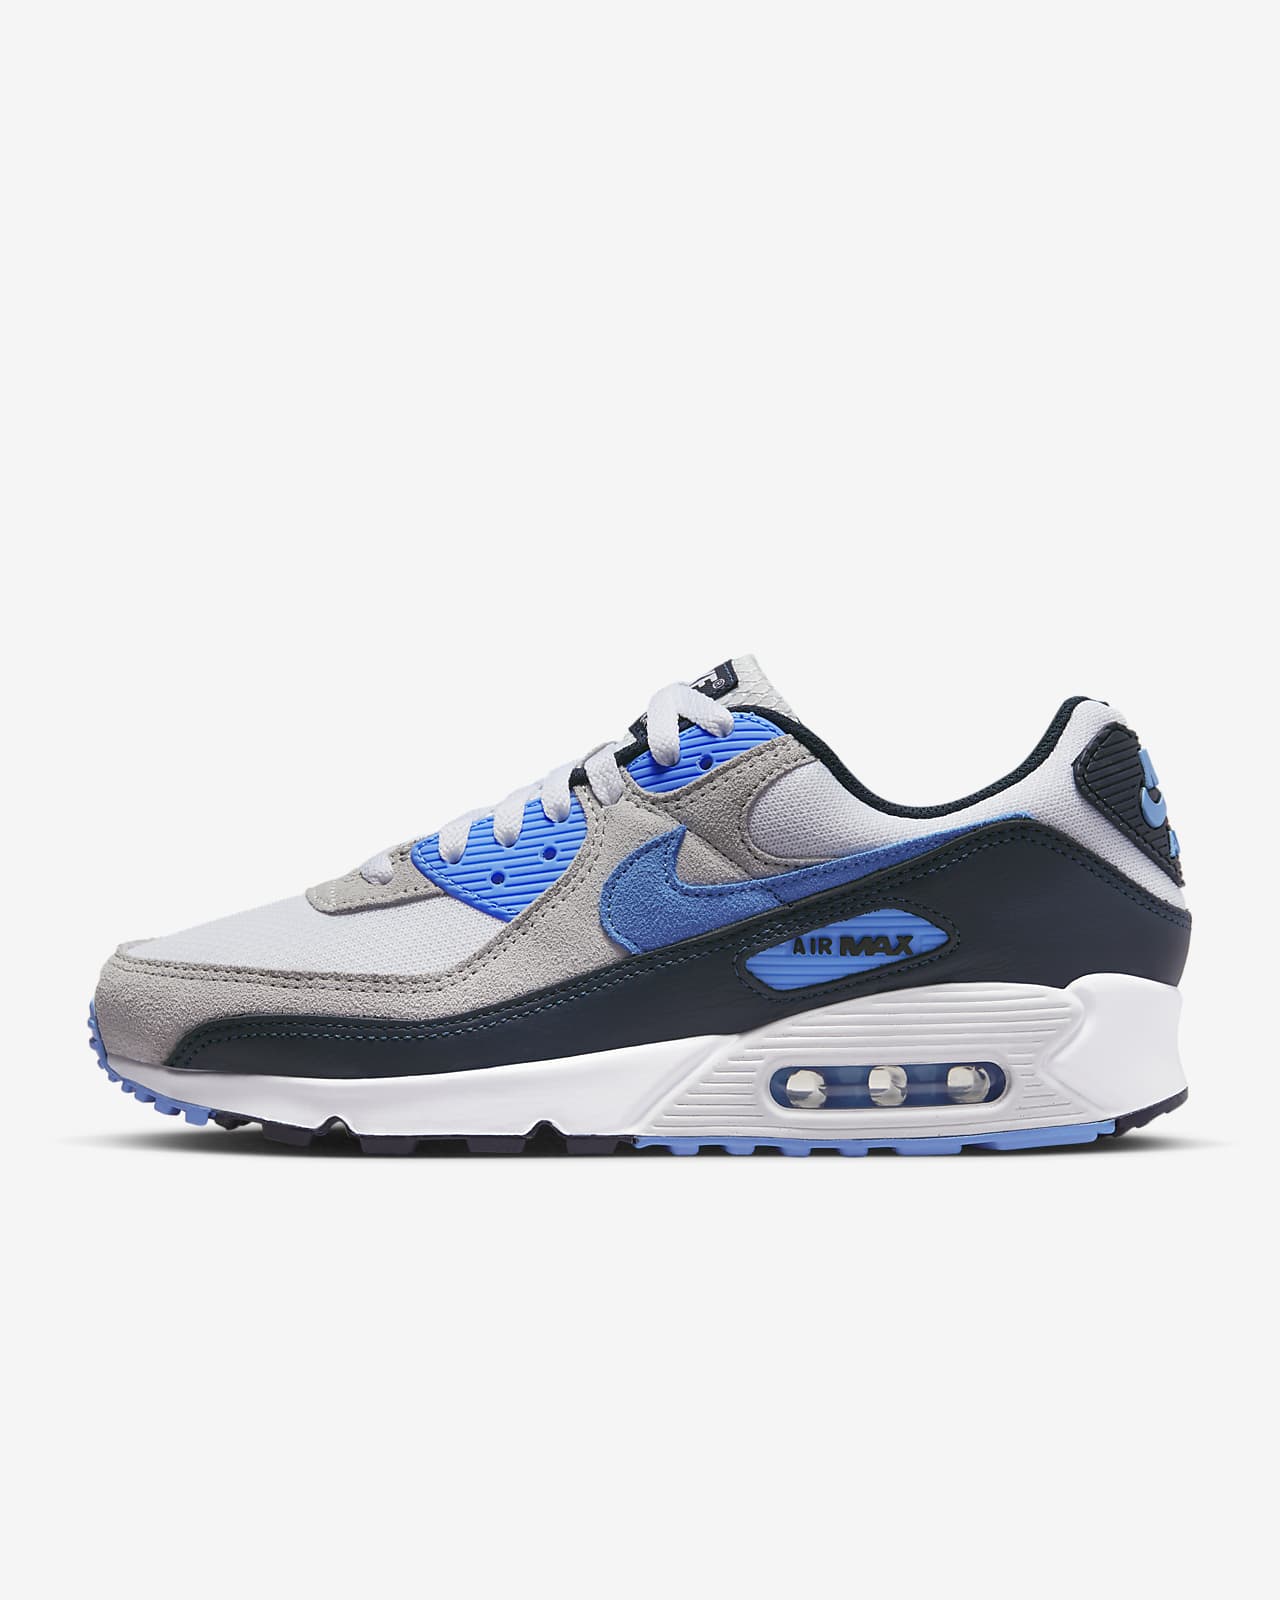 size 14 men's nike air max 90 shoes